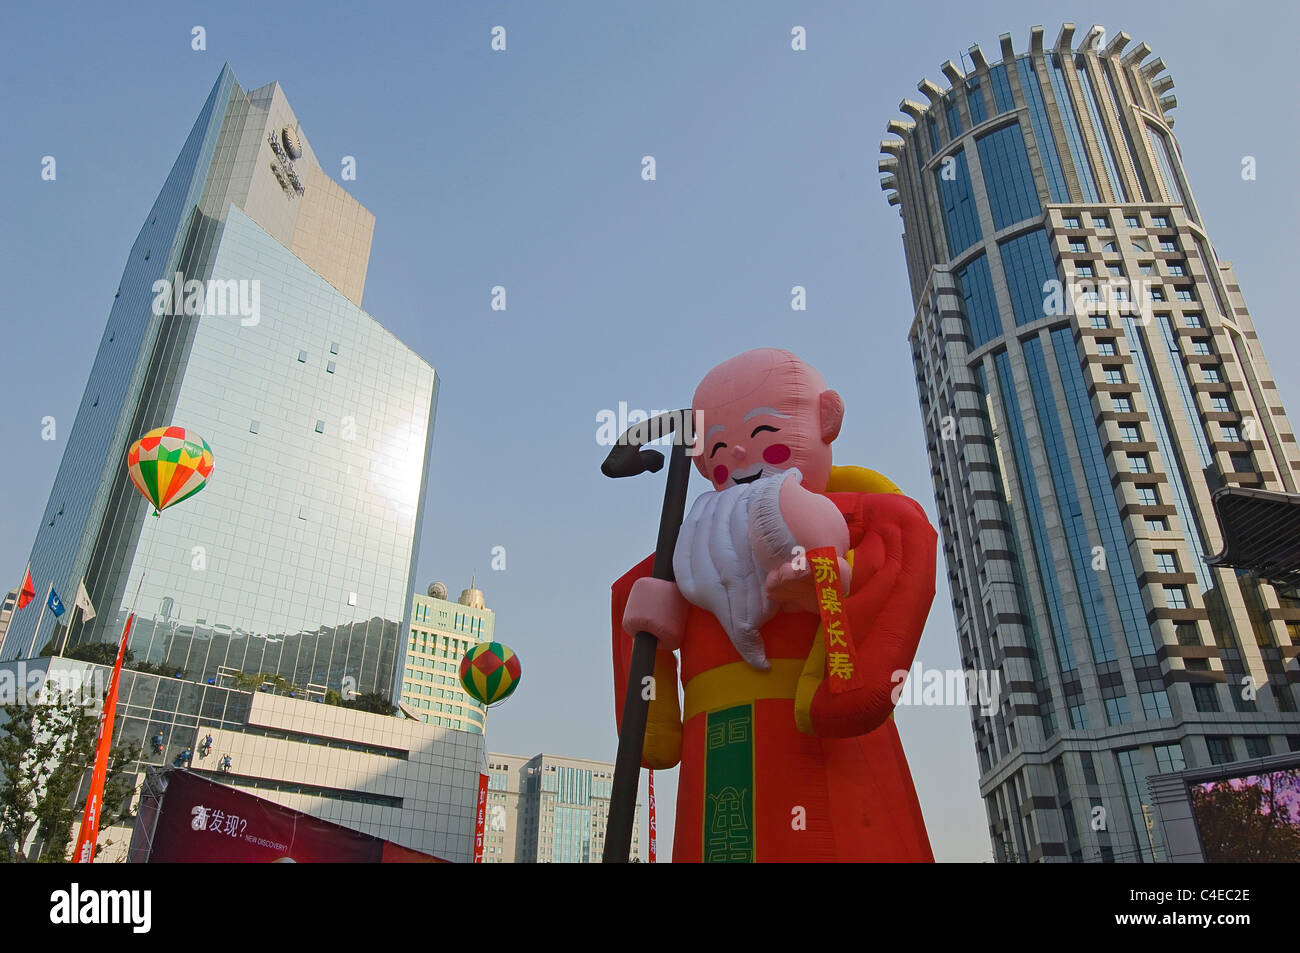 Inflated Chinese figure on Nanjing Road, the premier shopping street of modern Shanghai, China. Stock Photo